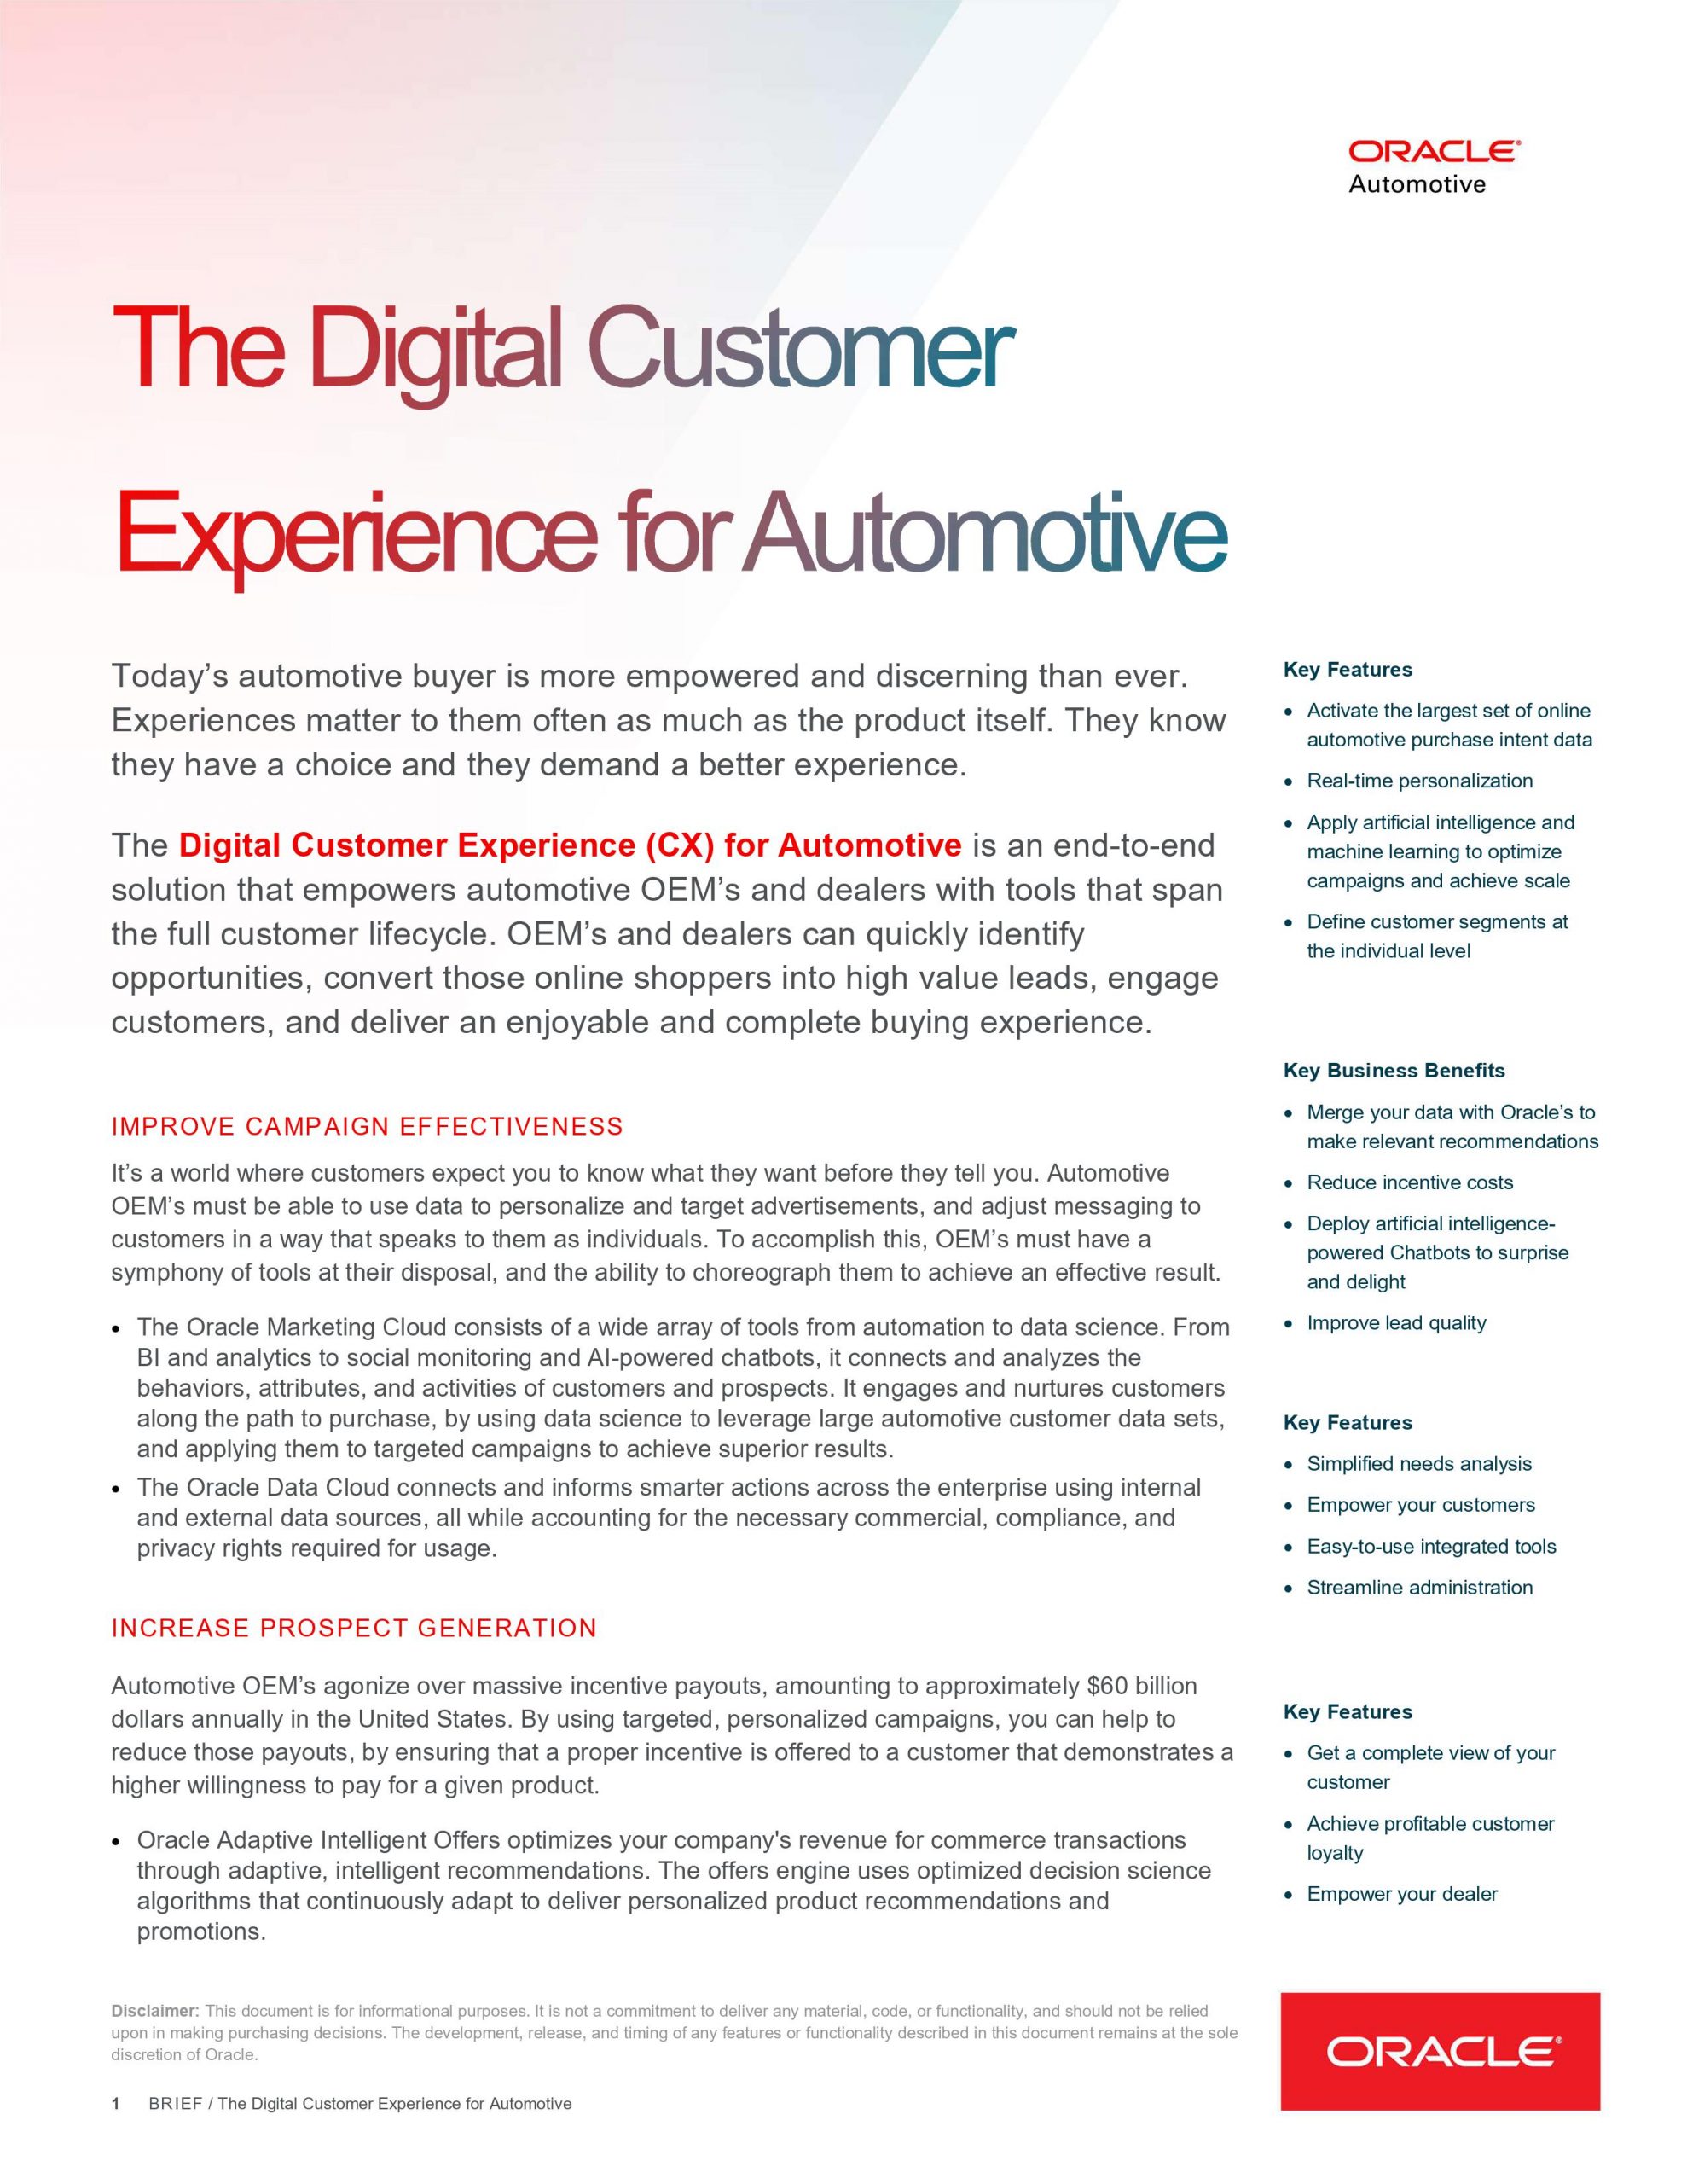 The Digital Customer Experience for Automotive